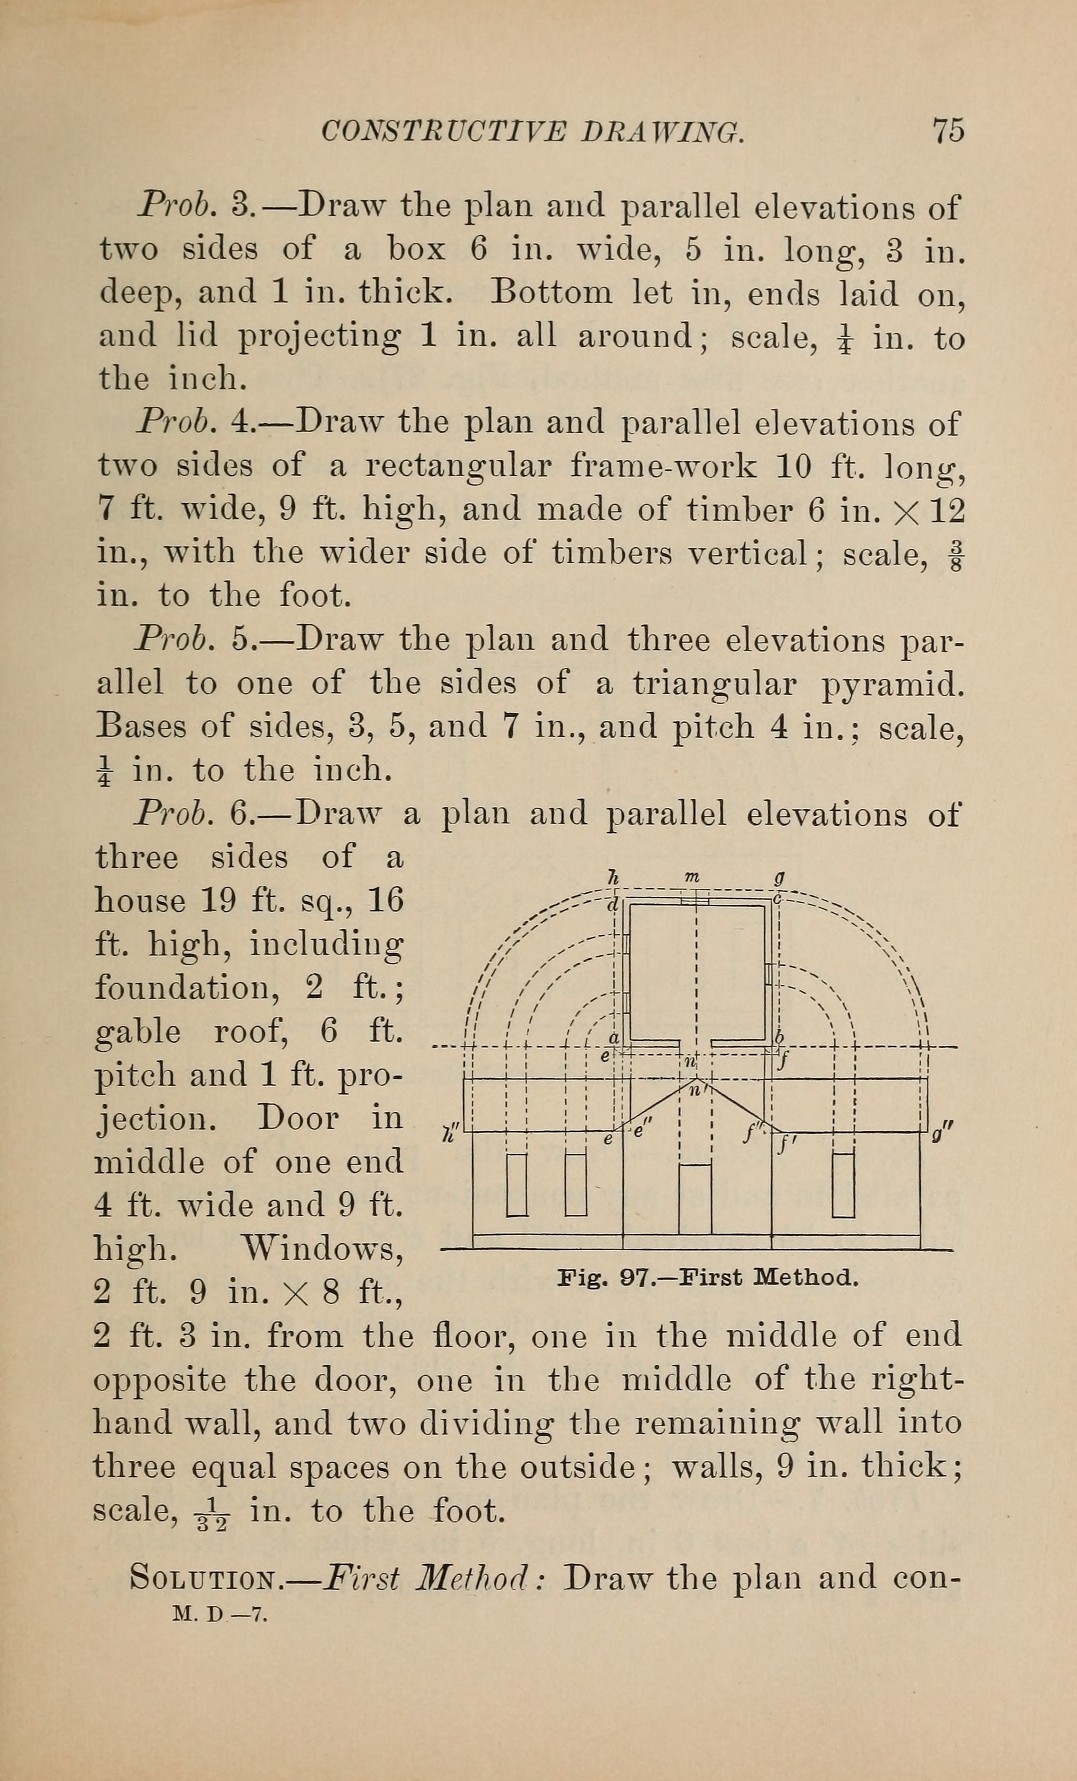 [Frank Aborn] Elementary mechanical drawing, for school and shop [English] 79